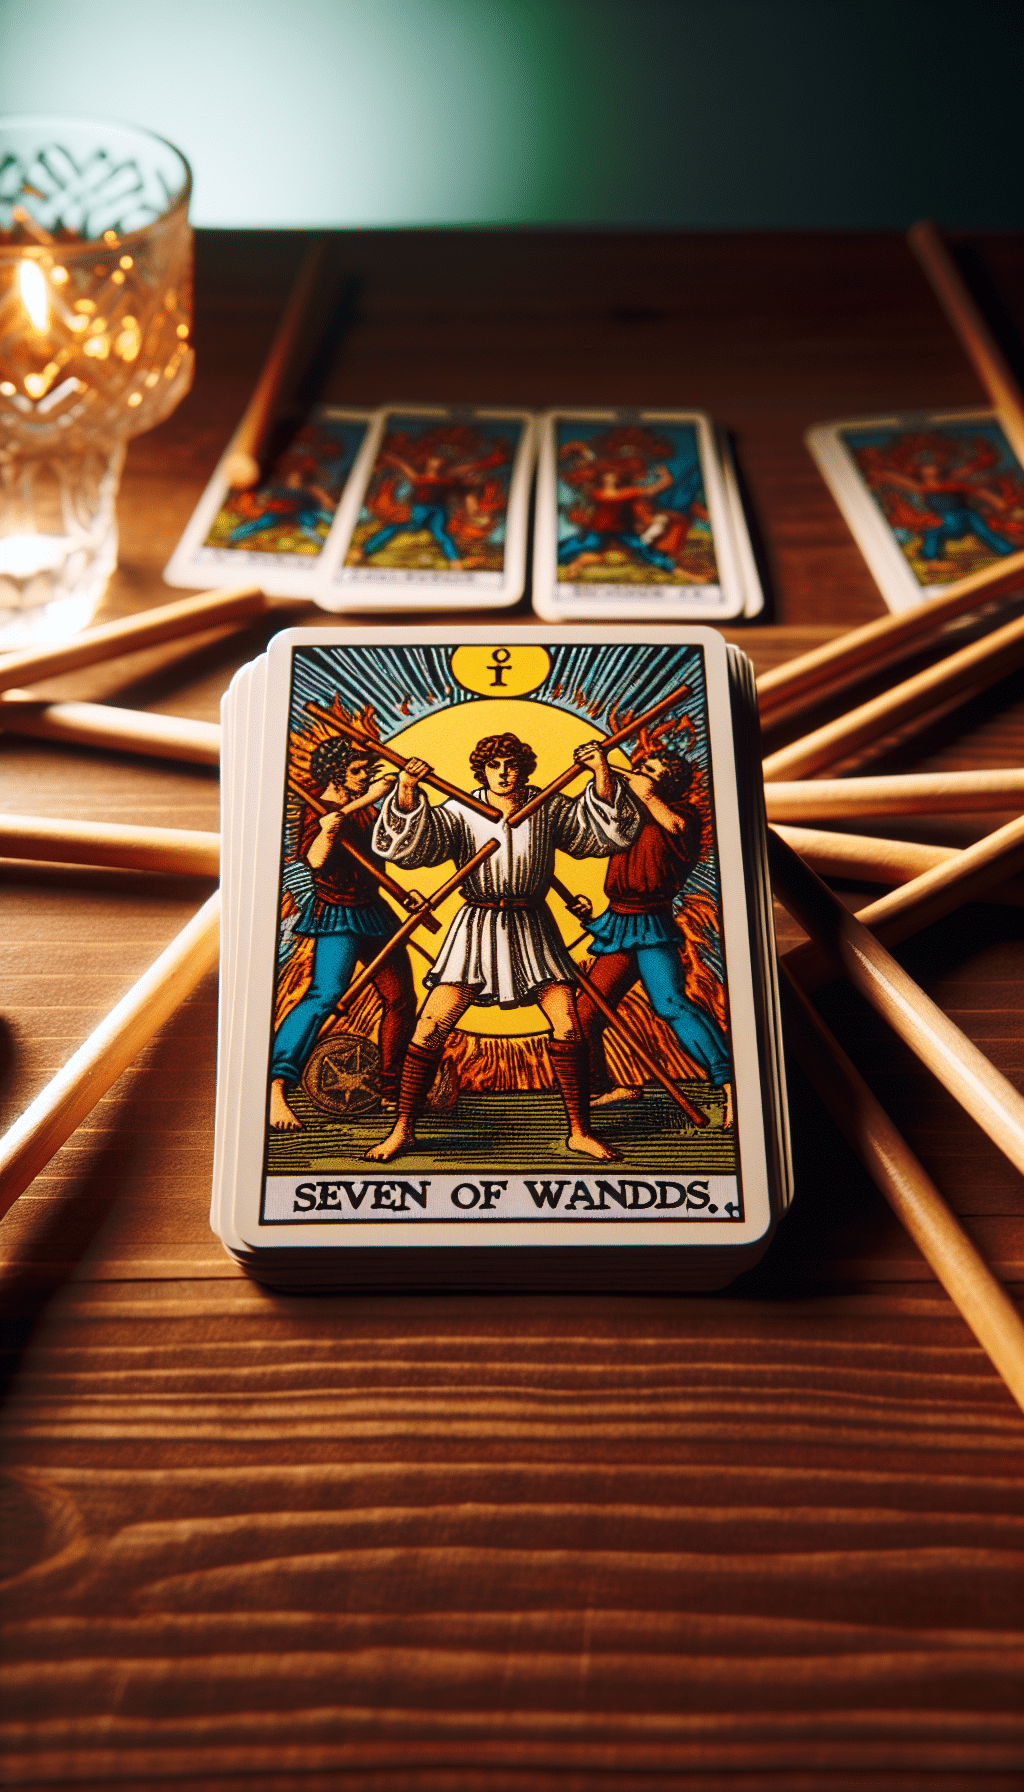 Mastering Conflict: The Seven of Wands in Conflict Resolution